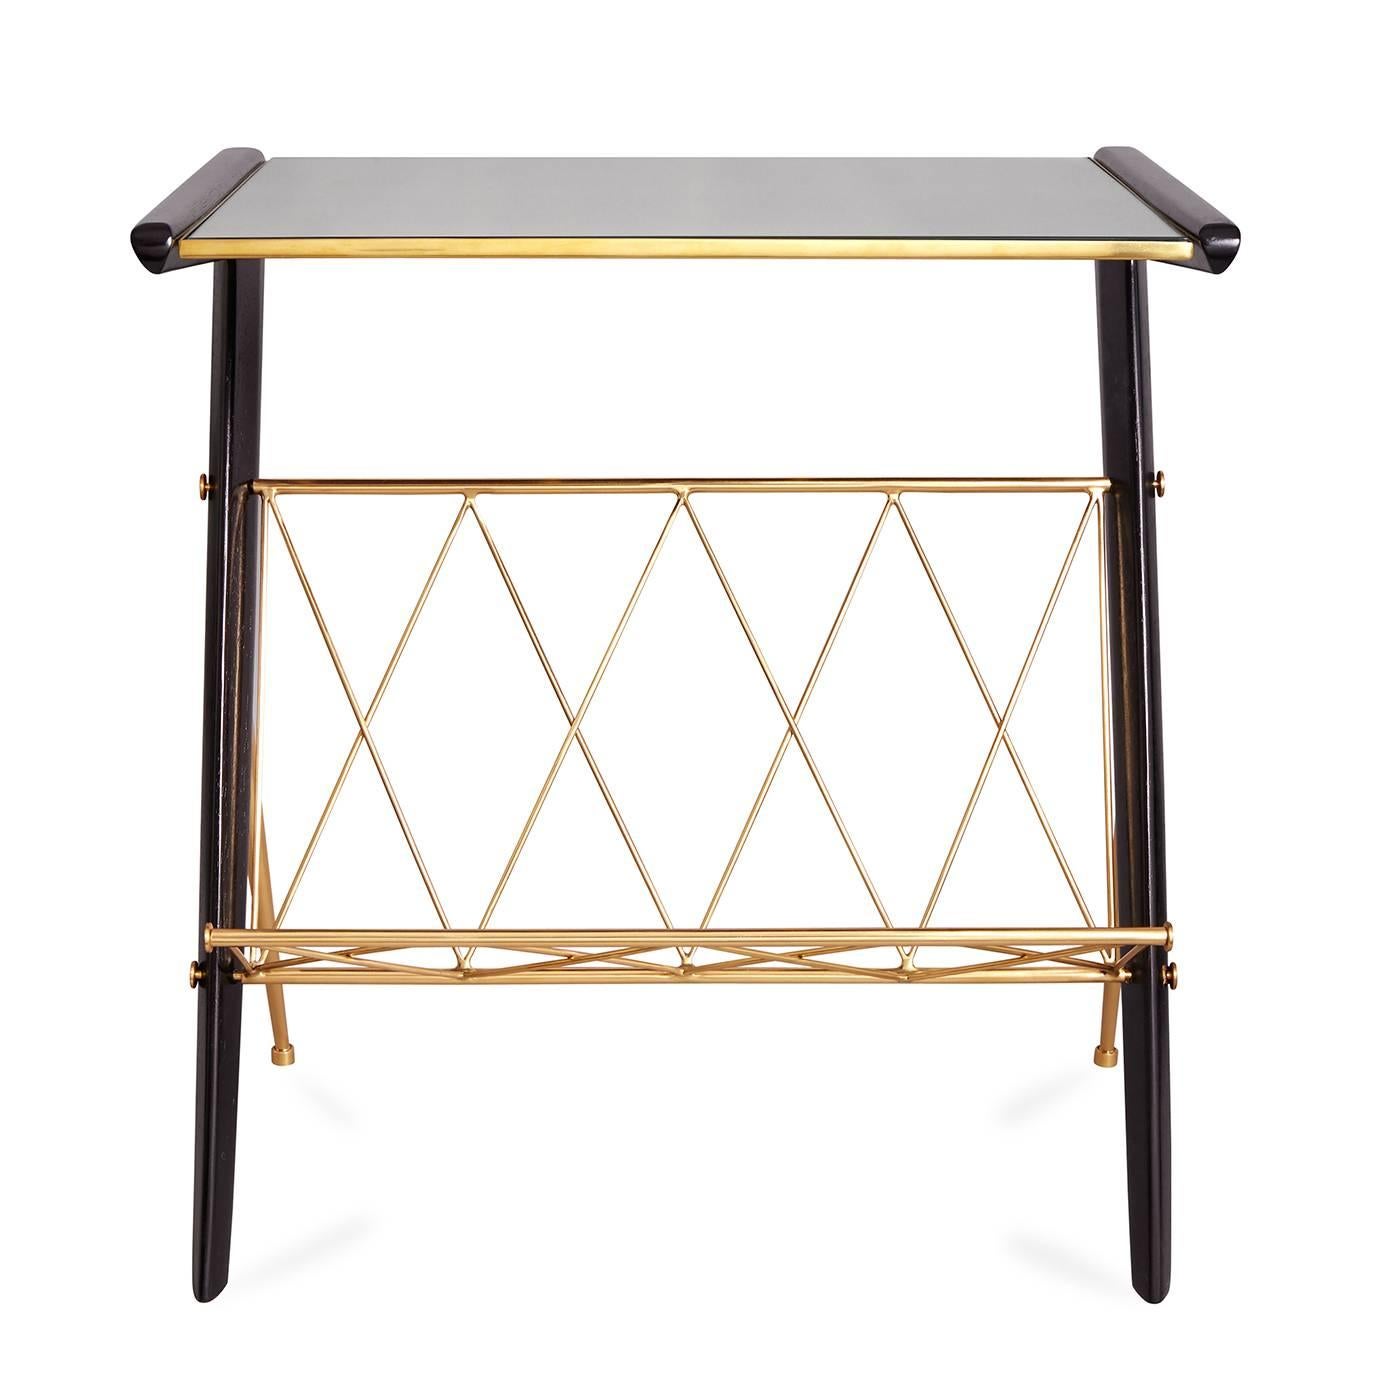 French flair. Posh up your pad with our ultra-useful and unexpected end table/magazine rack. A slim and dynamic ebonized wood frame is complemented by corset-inspired detailing in brass and an antiqued mirror top. Our St. Germain side table is the